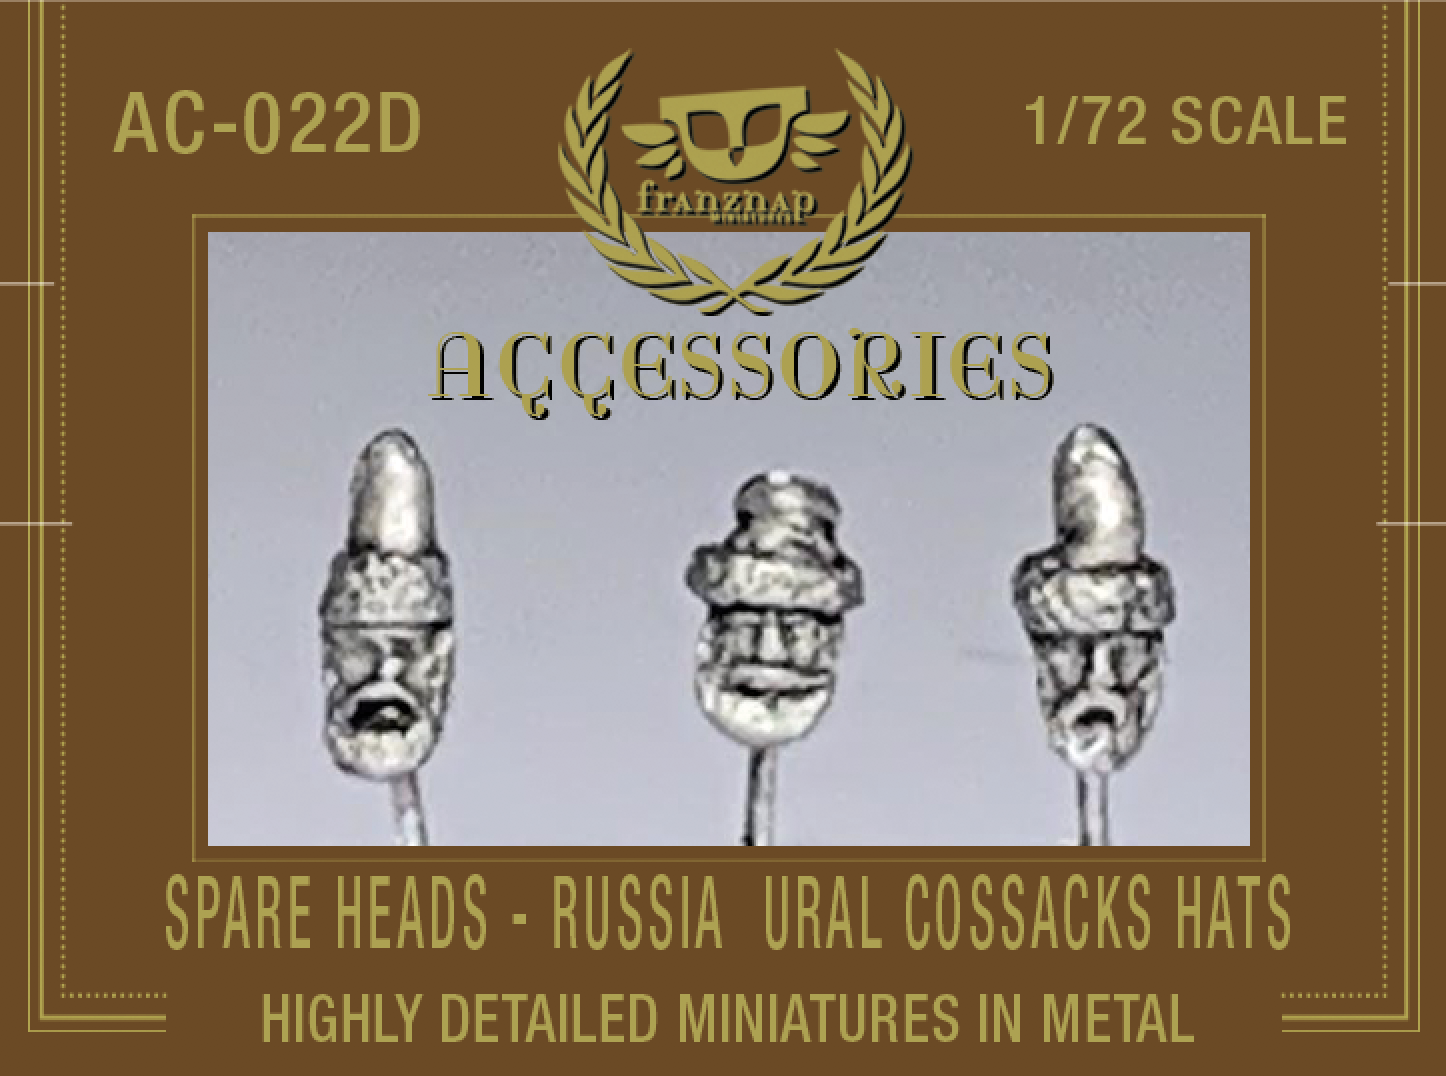 AC-022D SPARE HEADS Russia Ural Cossacks Hats